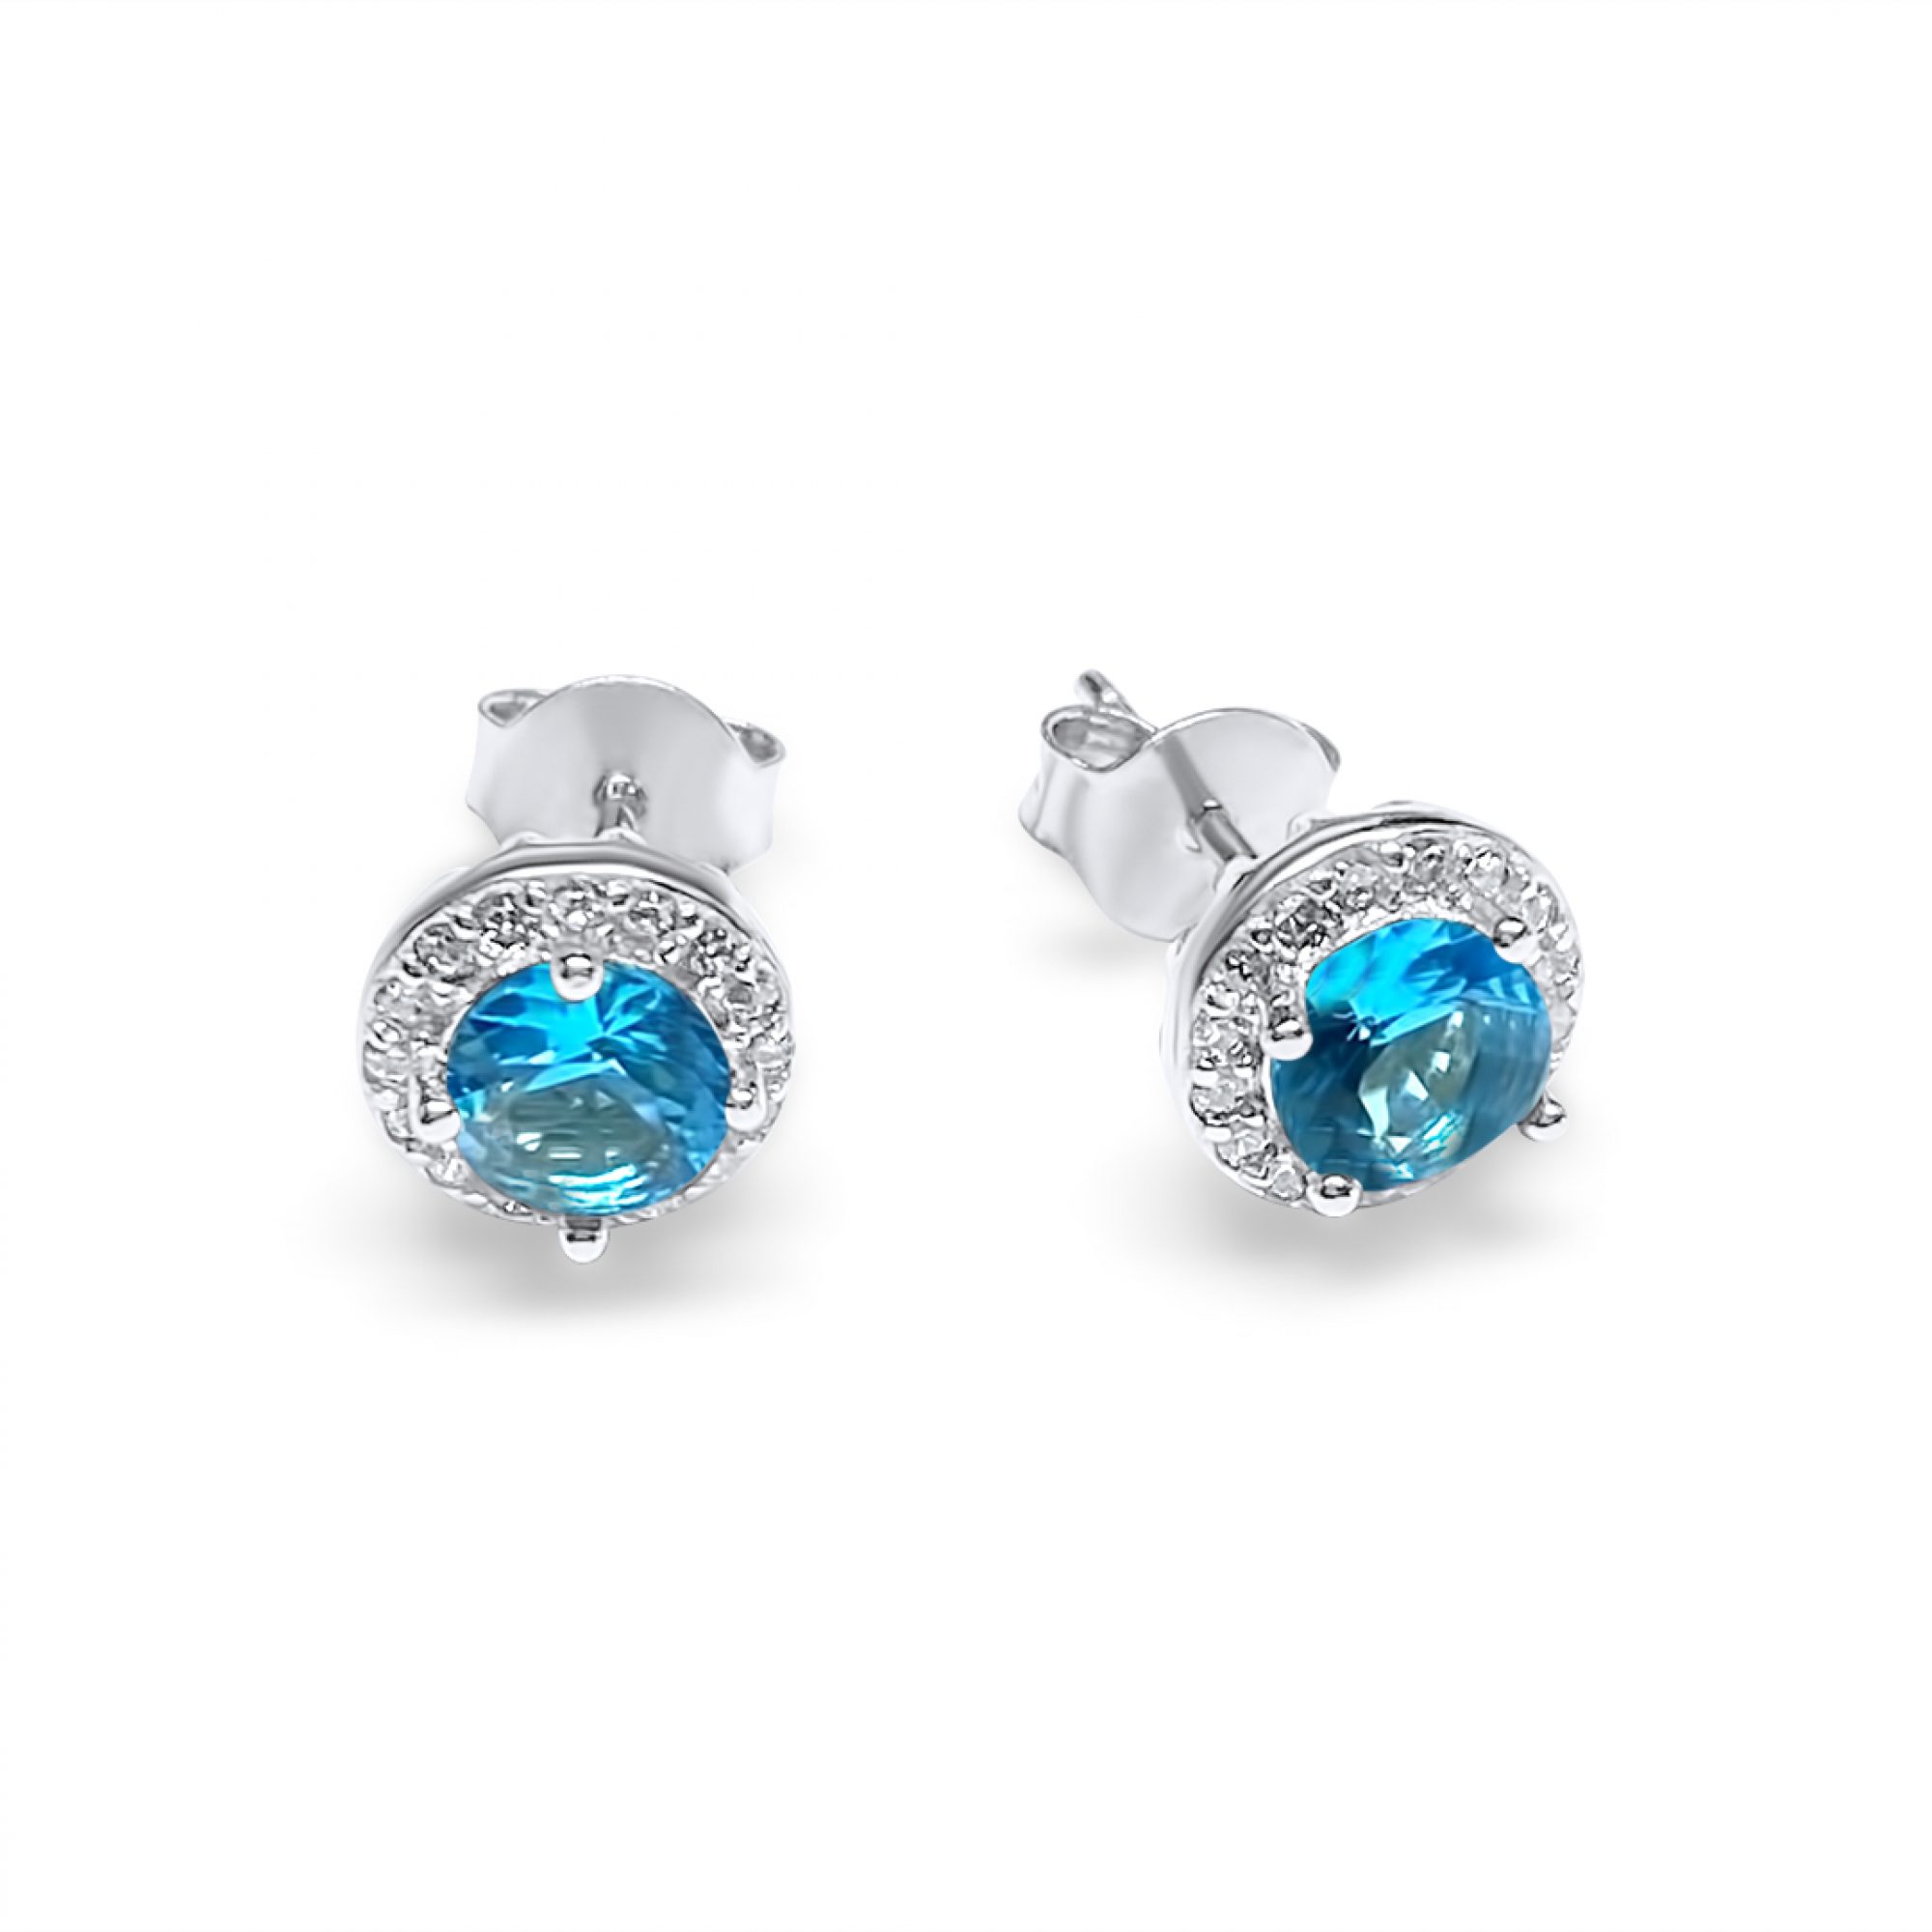 Silver stud earrings with aquamarine and zircon stones